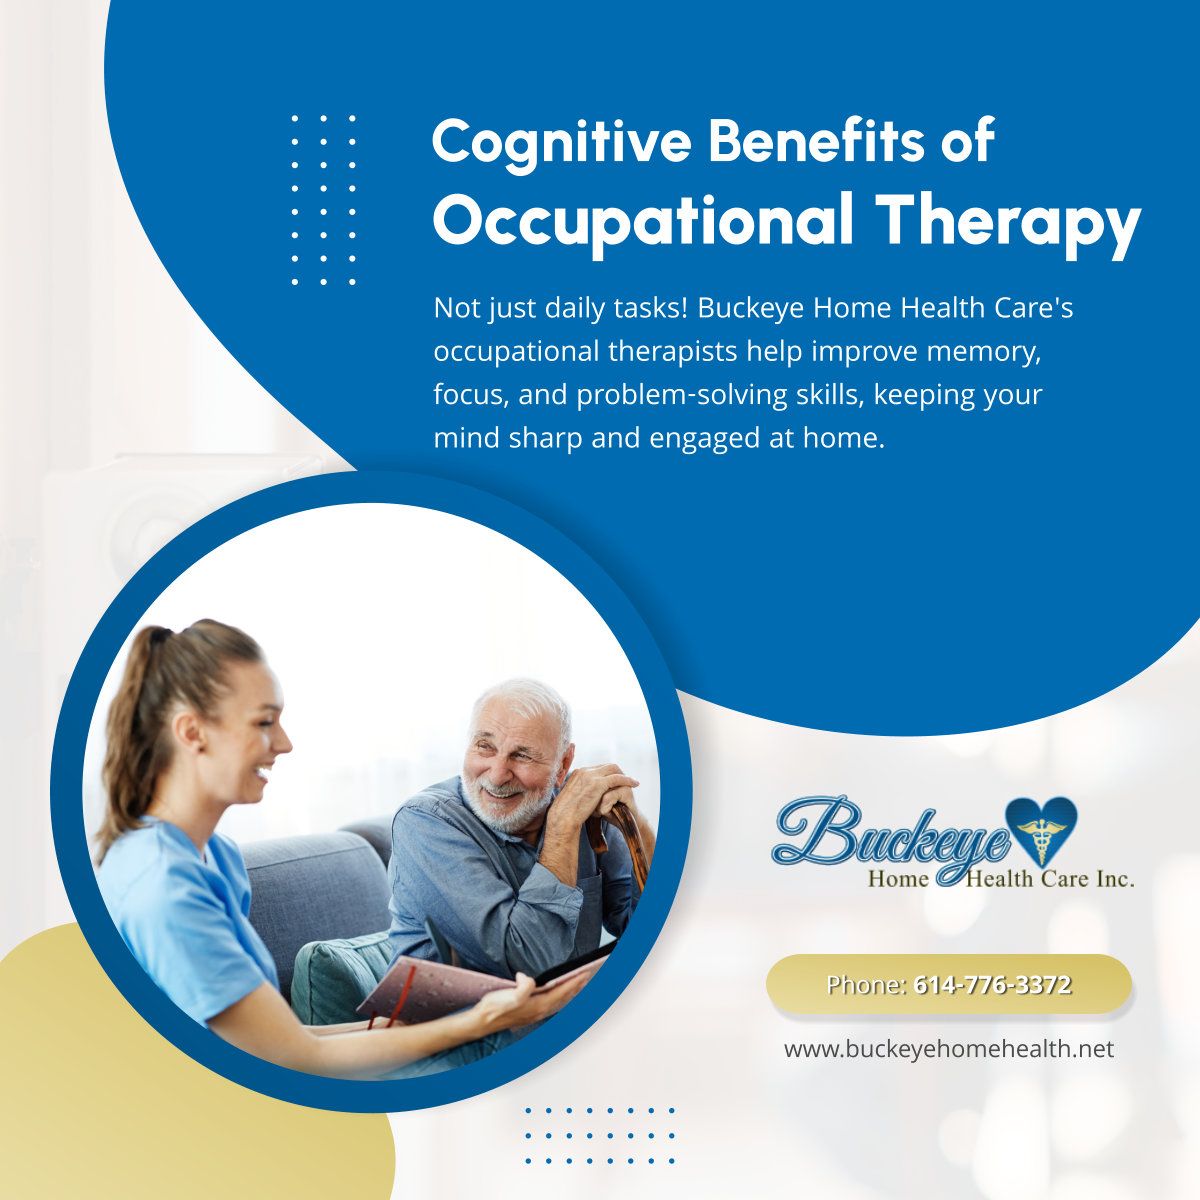 Keep your mind sharp, and stay mentally active! Buckeye Home Health Care's occupational therapists go beyond daily living skills. They help improve memory, focus, and problem-solving for a healthier you.

#WestervilleOH #HomeHealthCare #BrainPowerAtHome